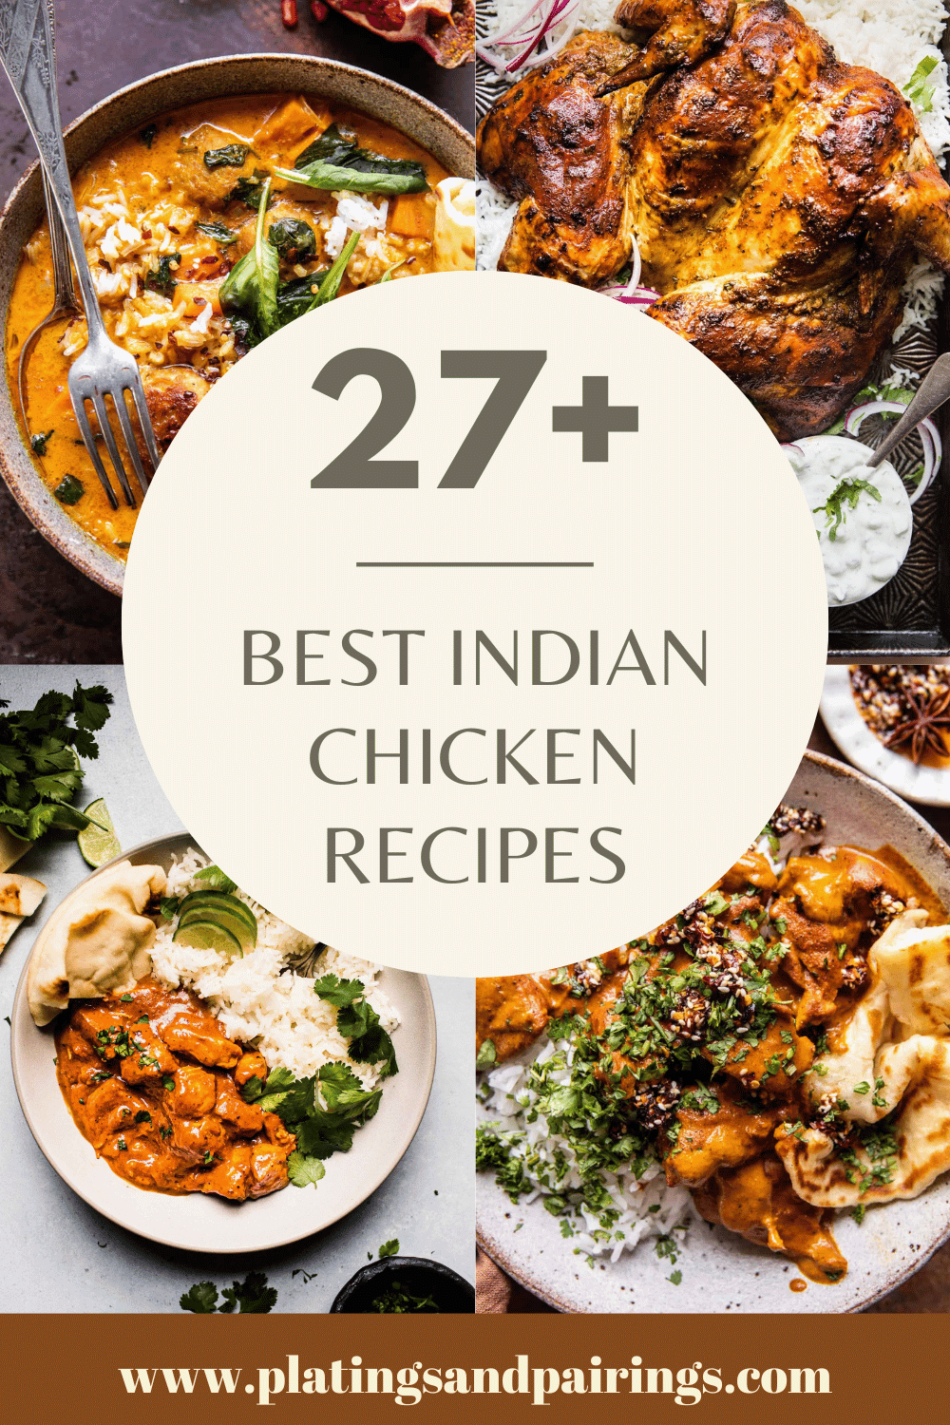 27+ BEST Indian Chicken Recipes to Try at Home! – Platings + Pairings